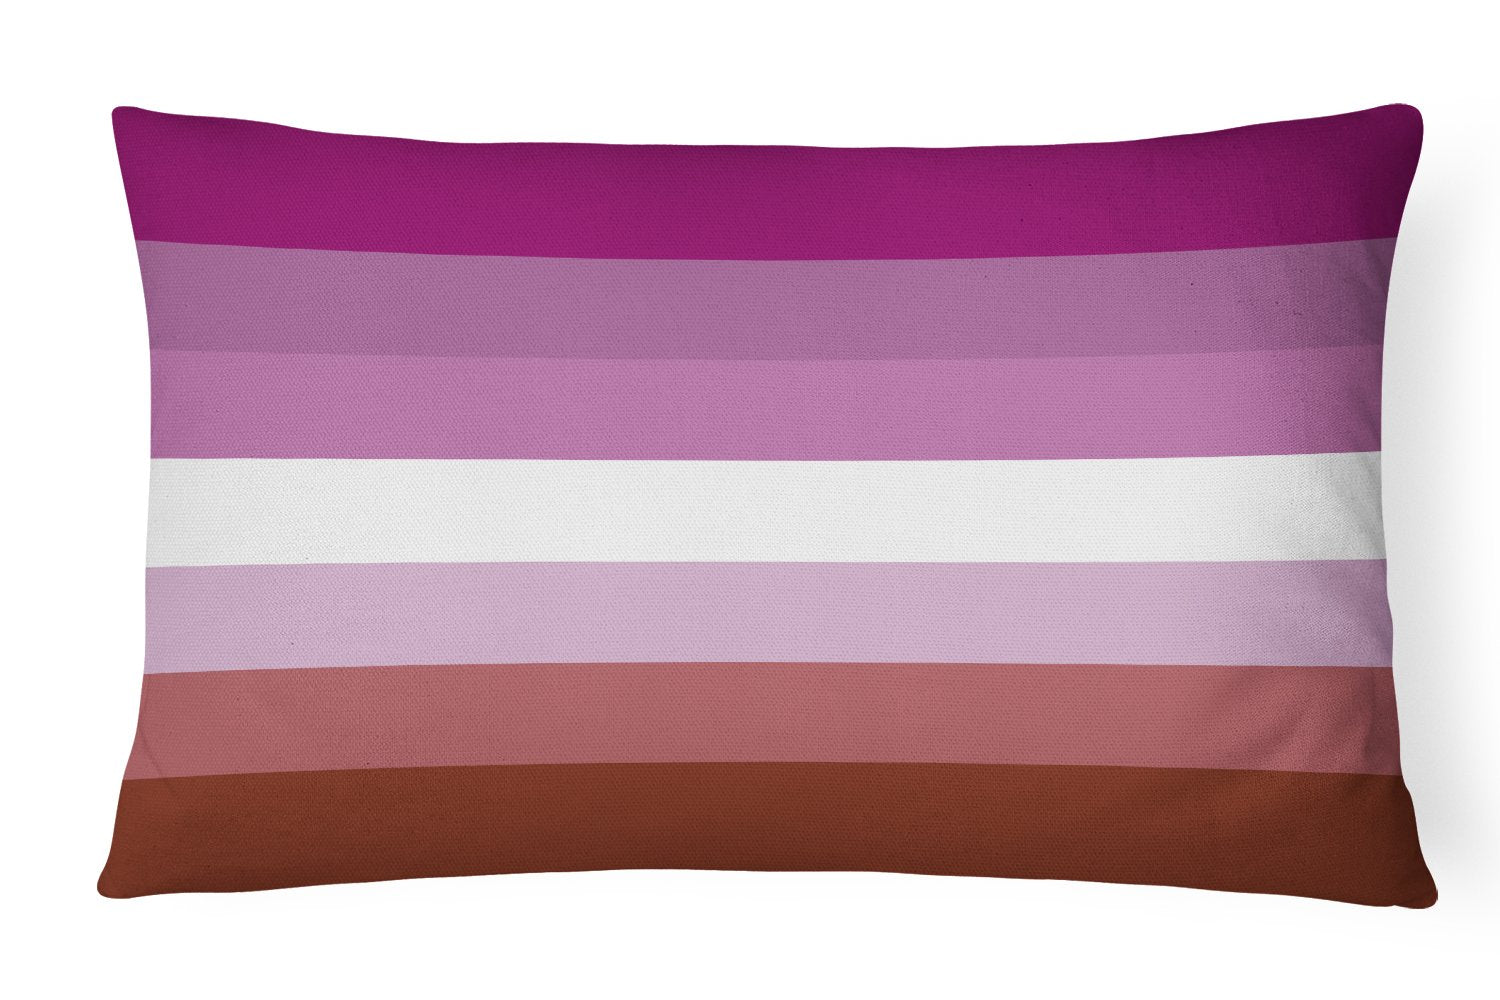 Buy this Lesbian Pride Canvas Fabric Decorative Pillow